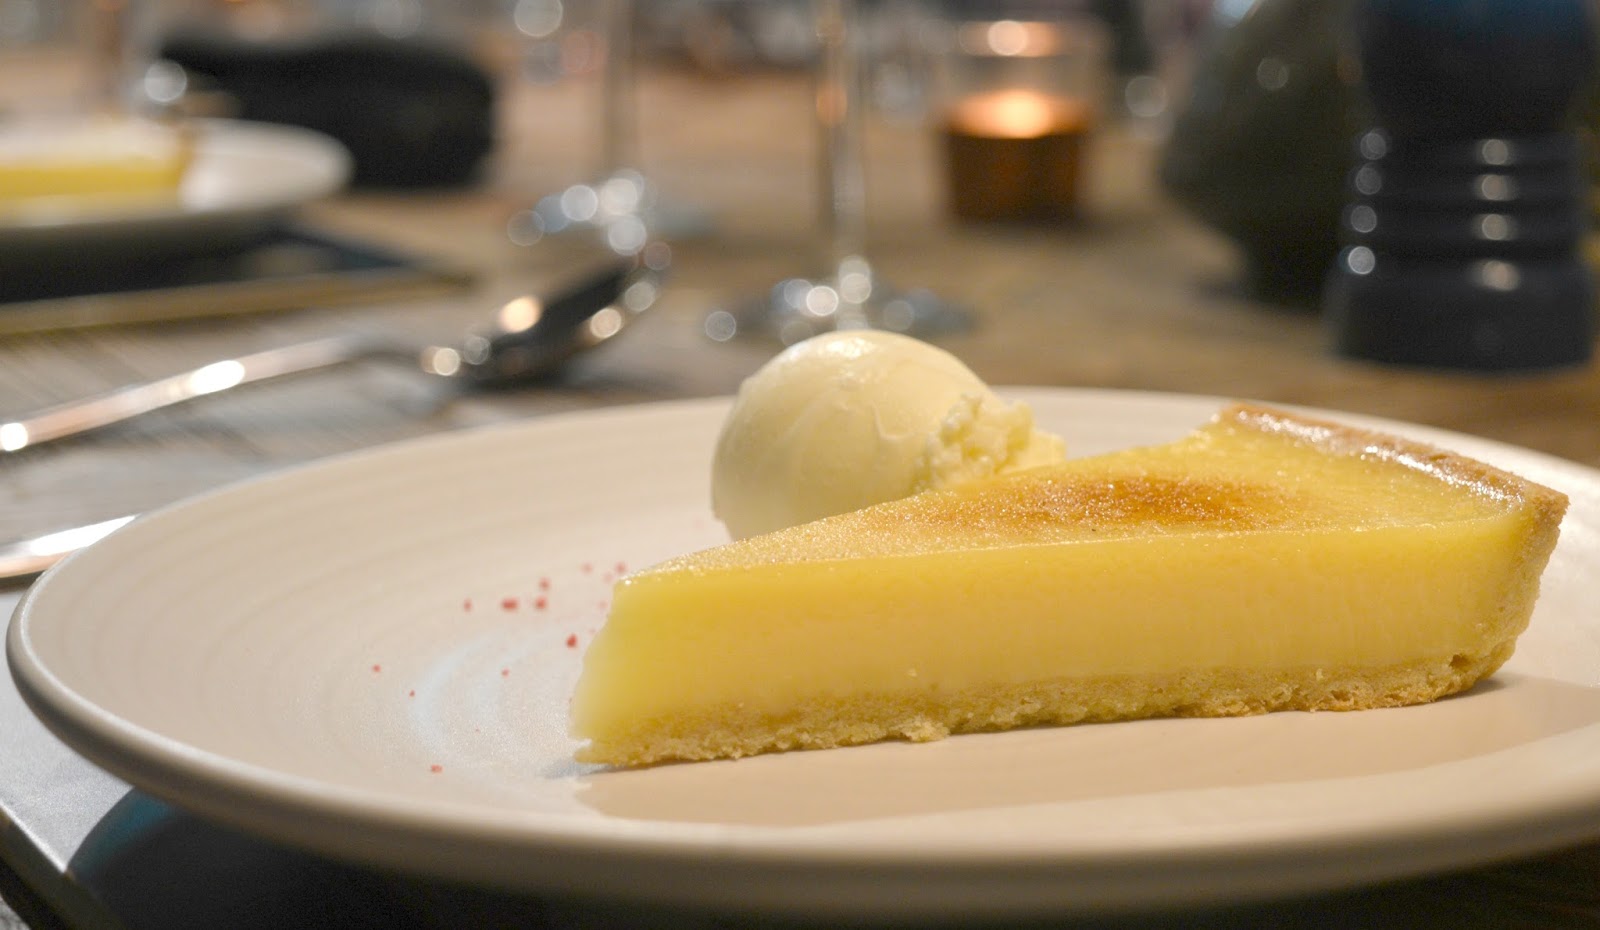 The Crewe Supper Club at the Gatehouse, Lord Crewe Arms, Blanchland - Lemon Tart